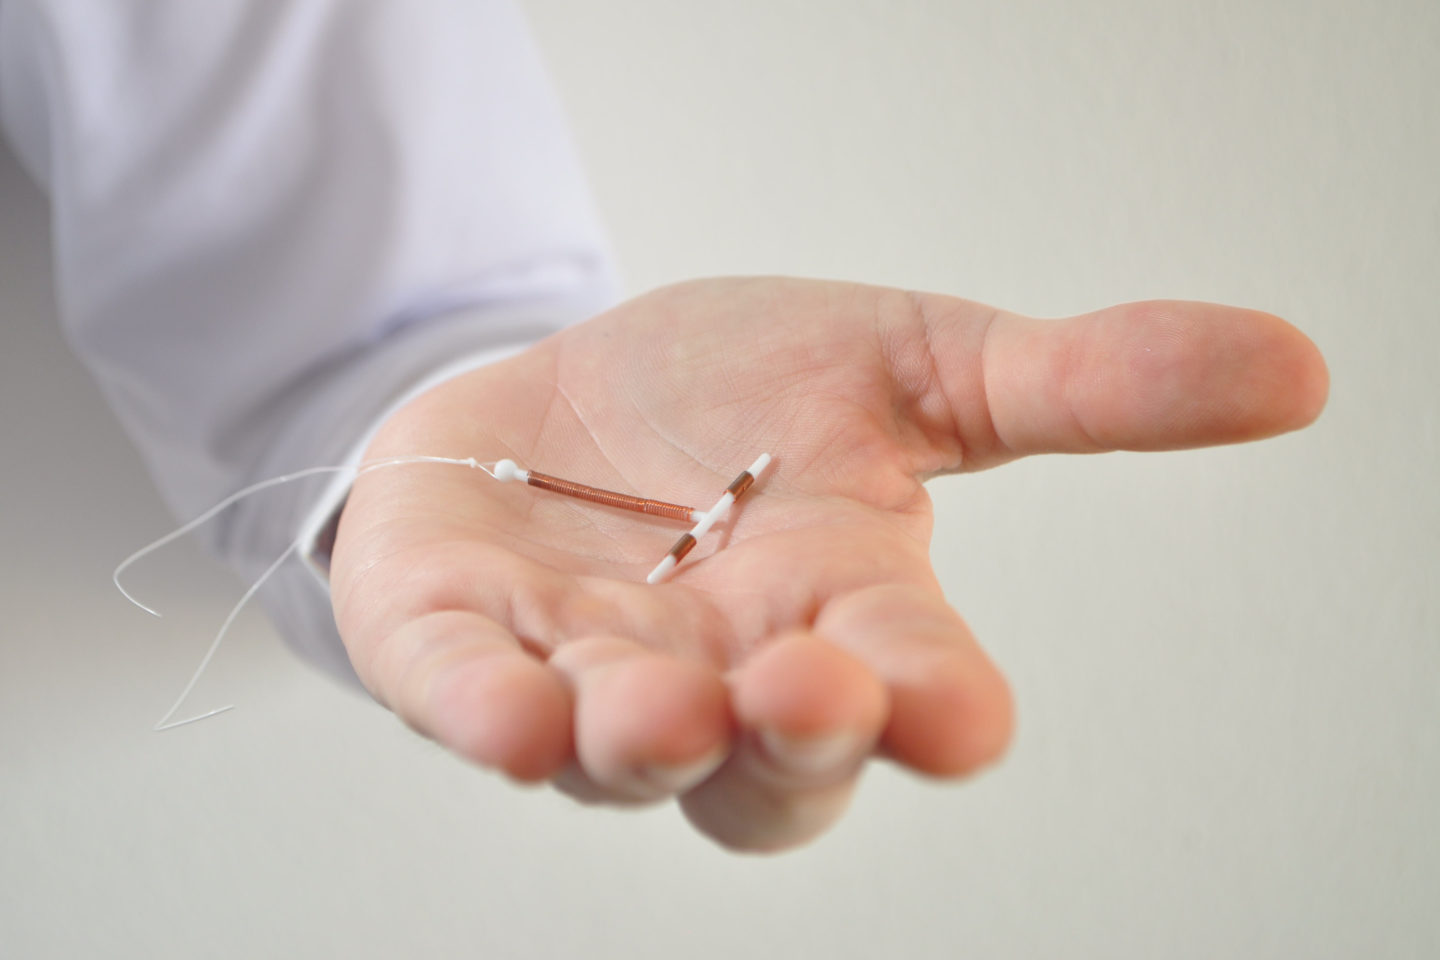 What It Really Feels Like to Get (and Remove) an IUD